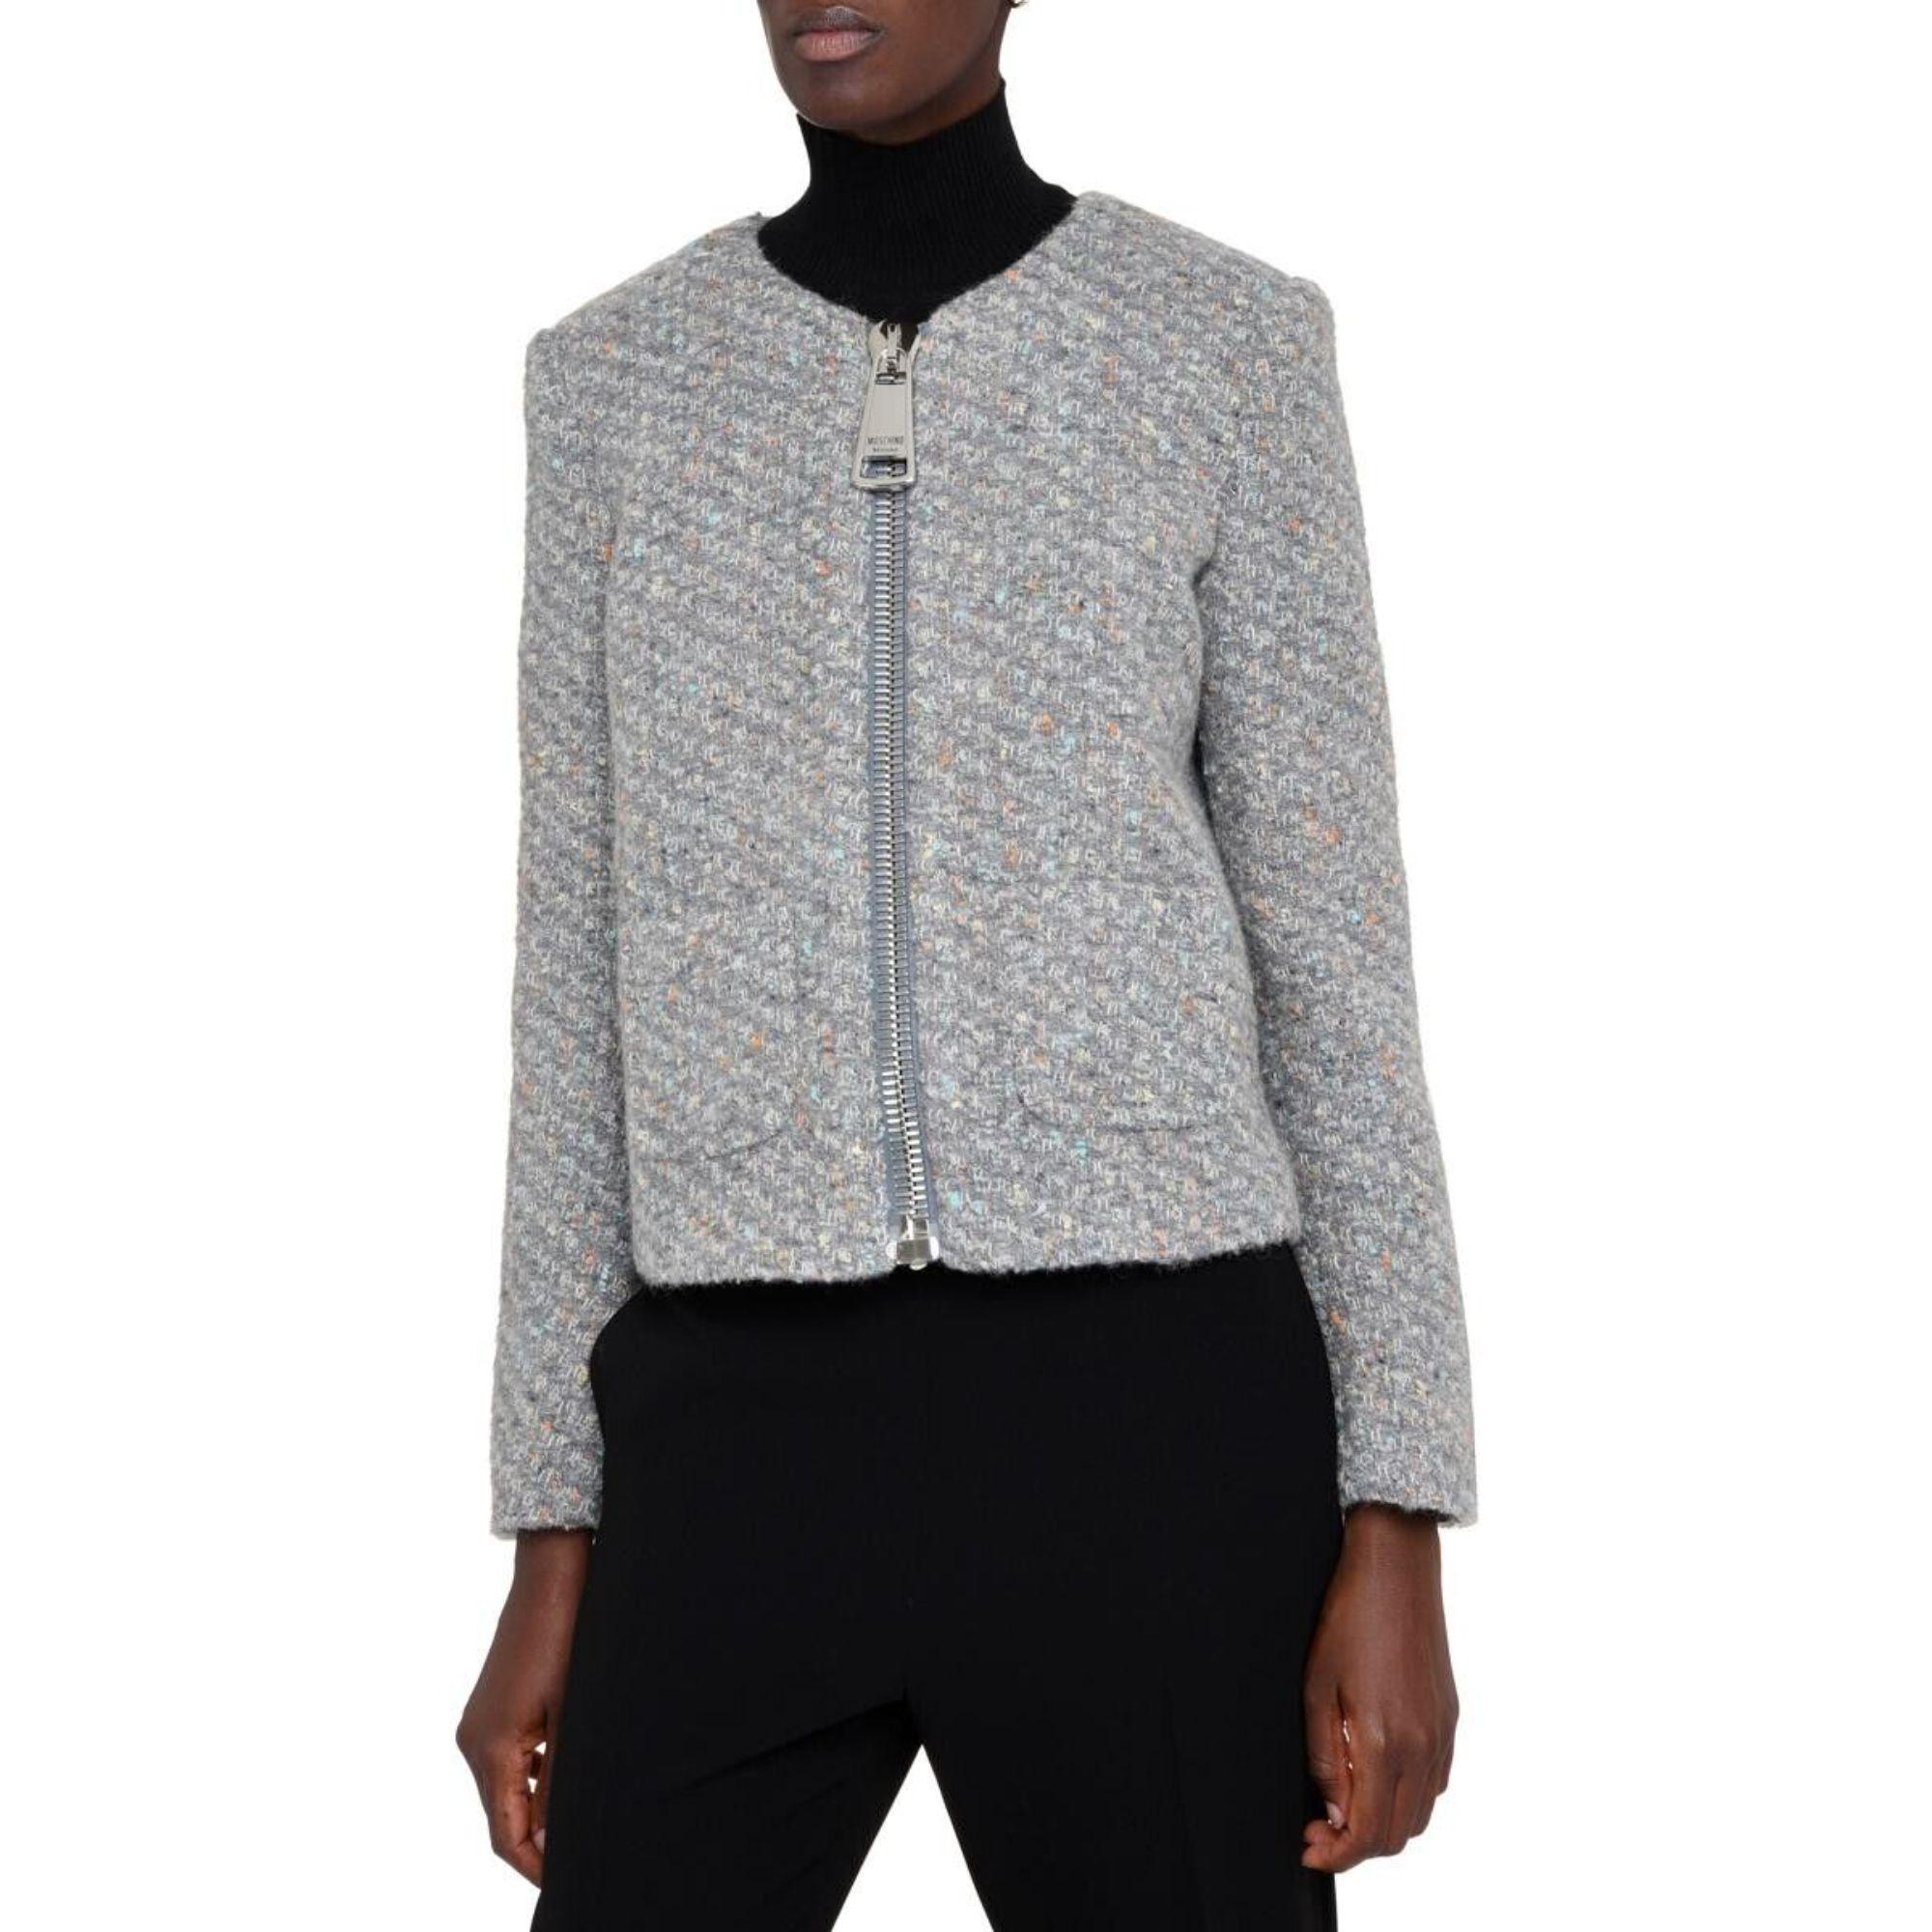 Gray AW20 Moschino Couture Boucle Wool Jacket by Jeremy Scott, Size US 8 For Sale